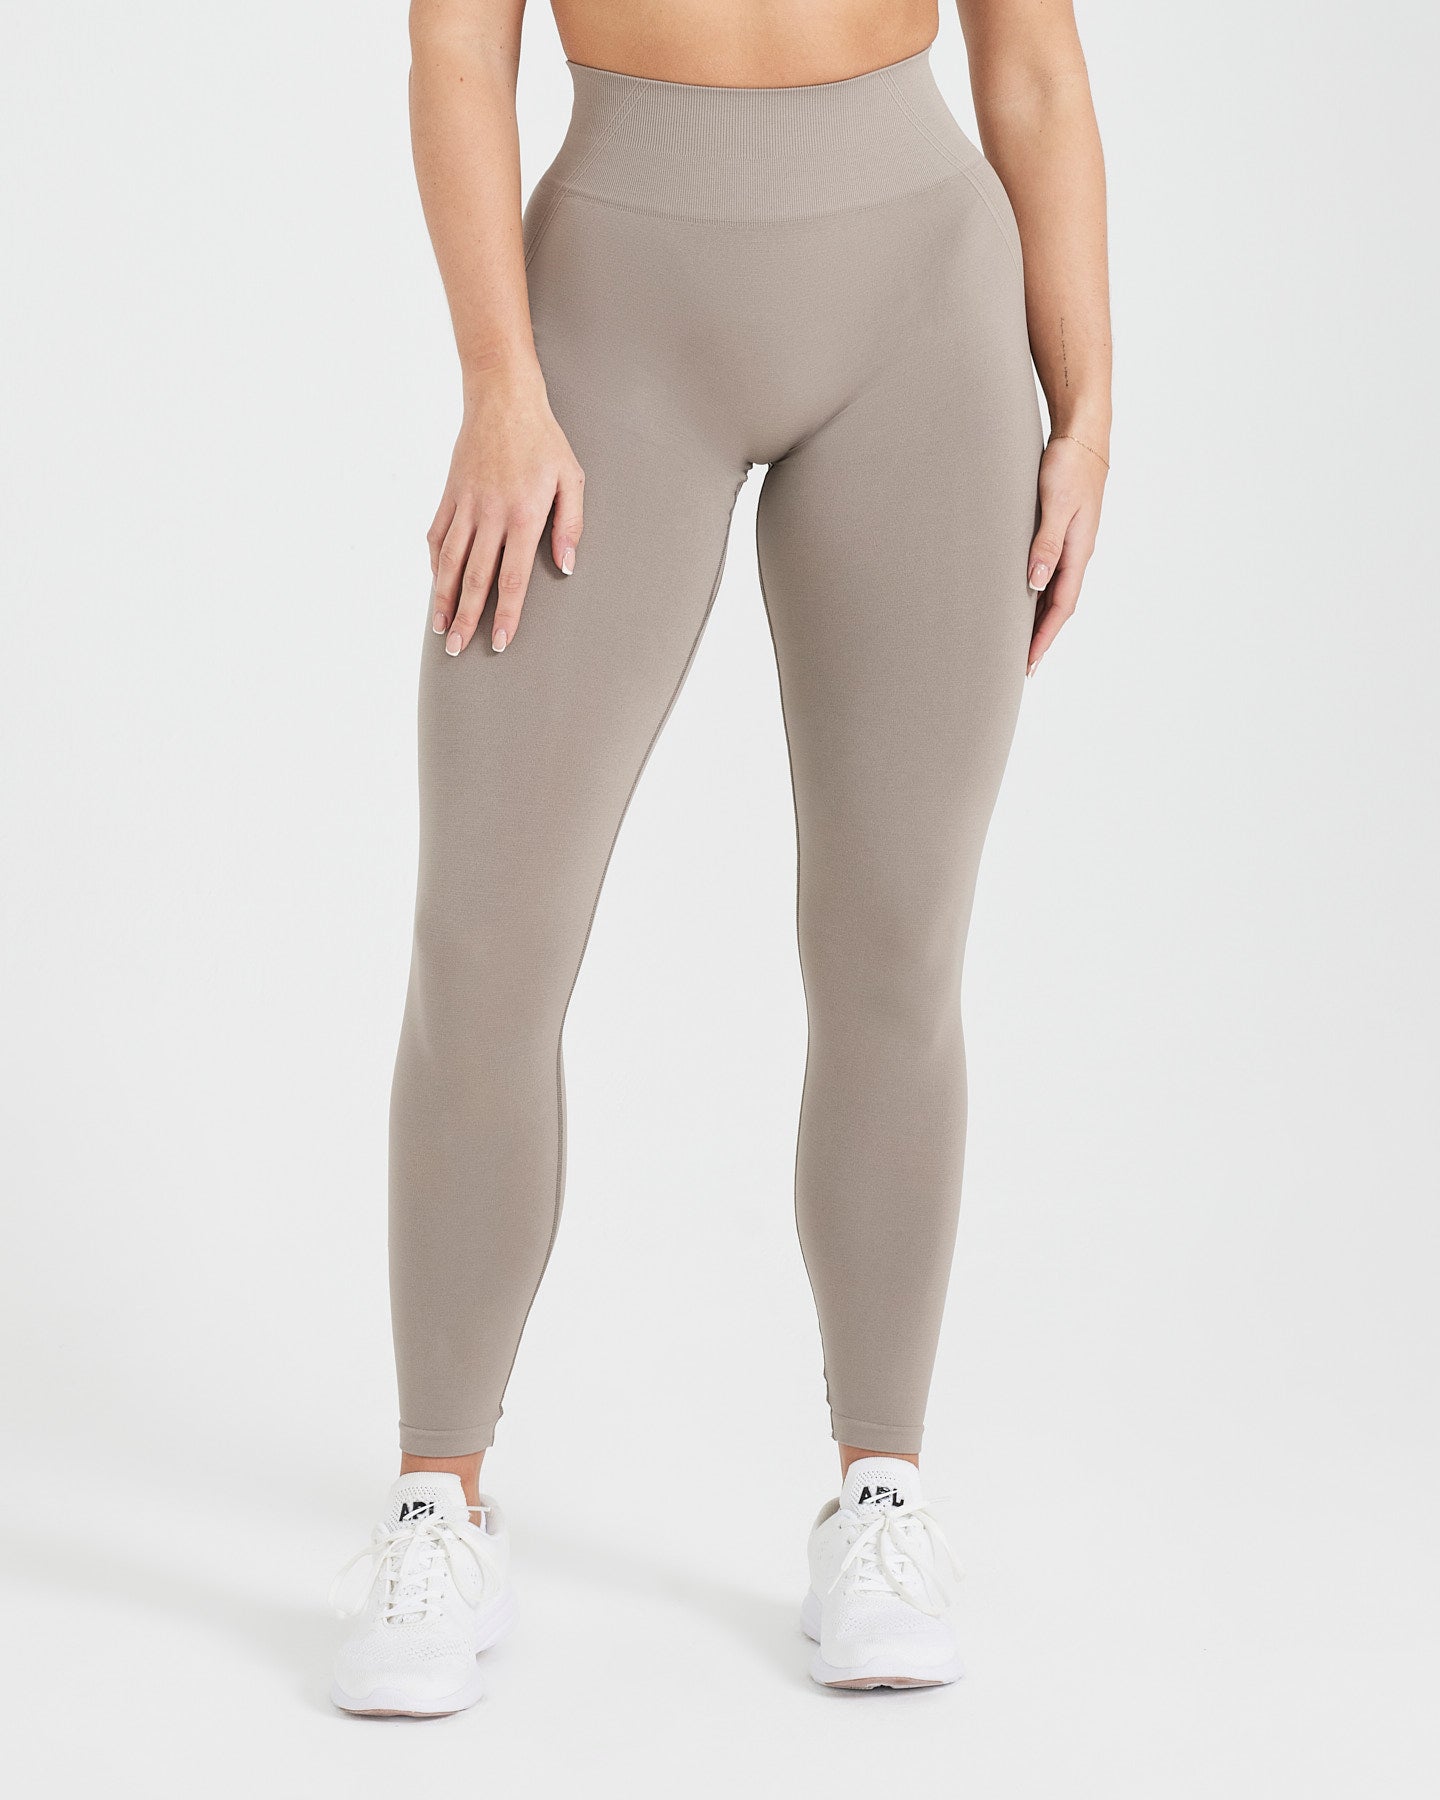 Plain Cotton Womens Grey Colour Leggings, Size: Large at Rs 299.00 in  Secunderabad